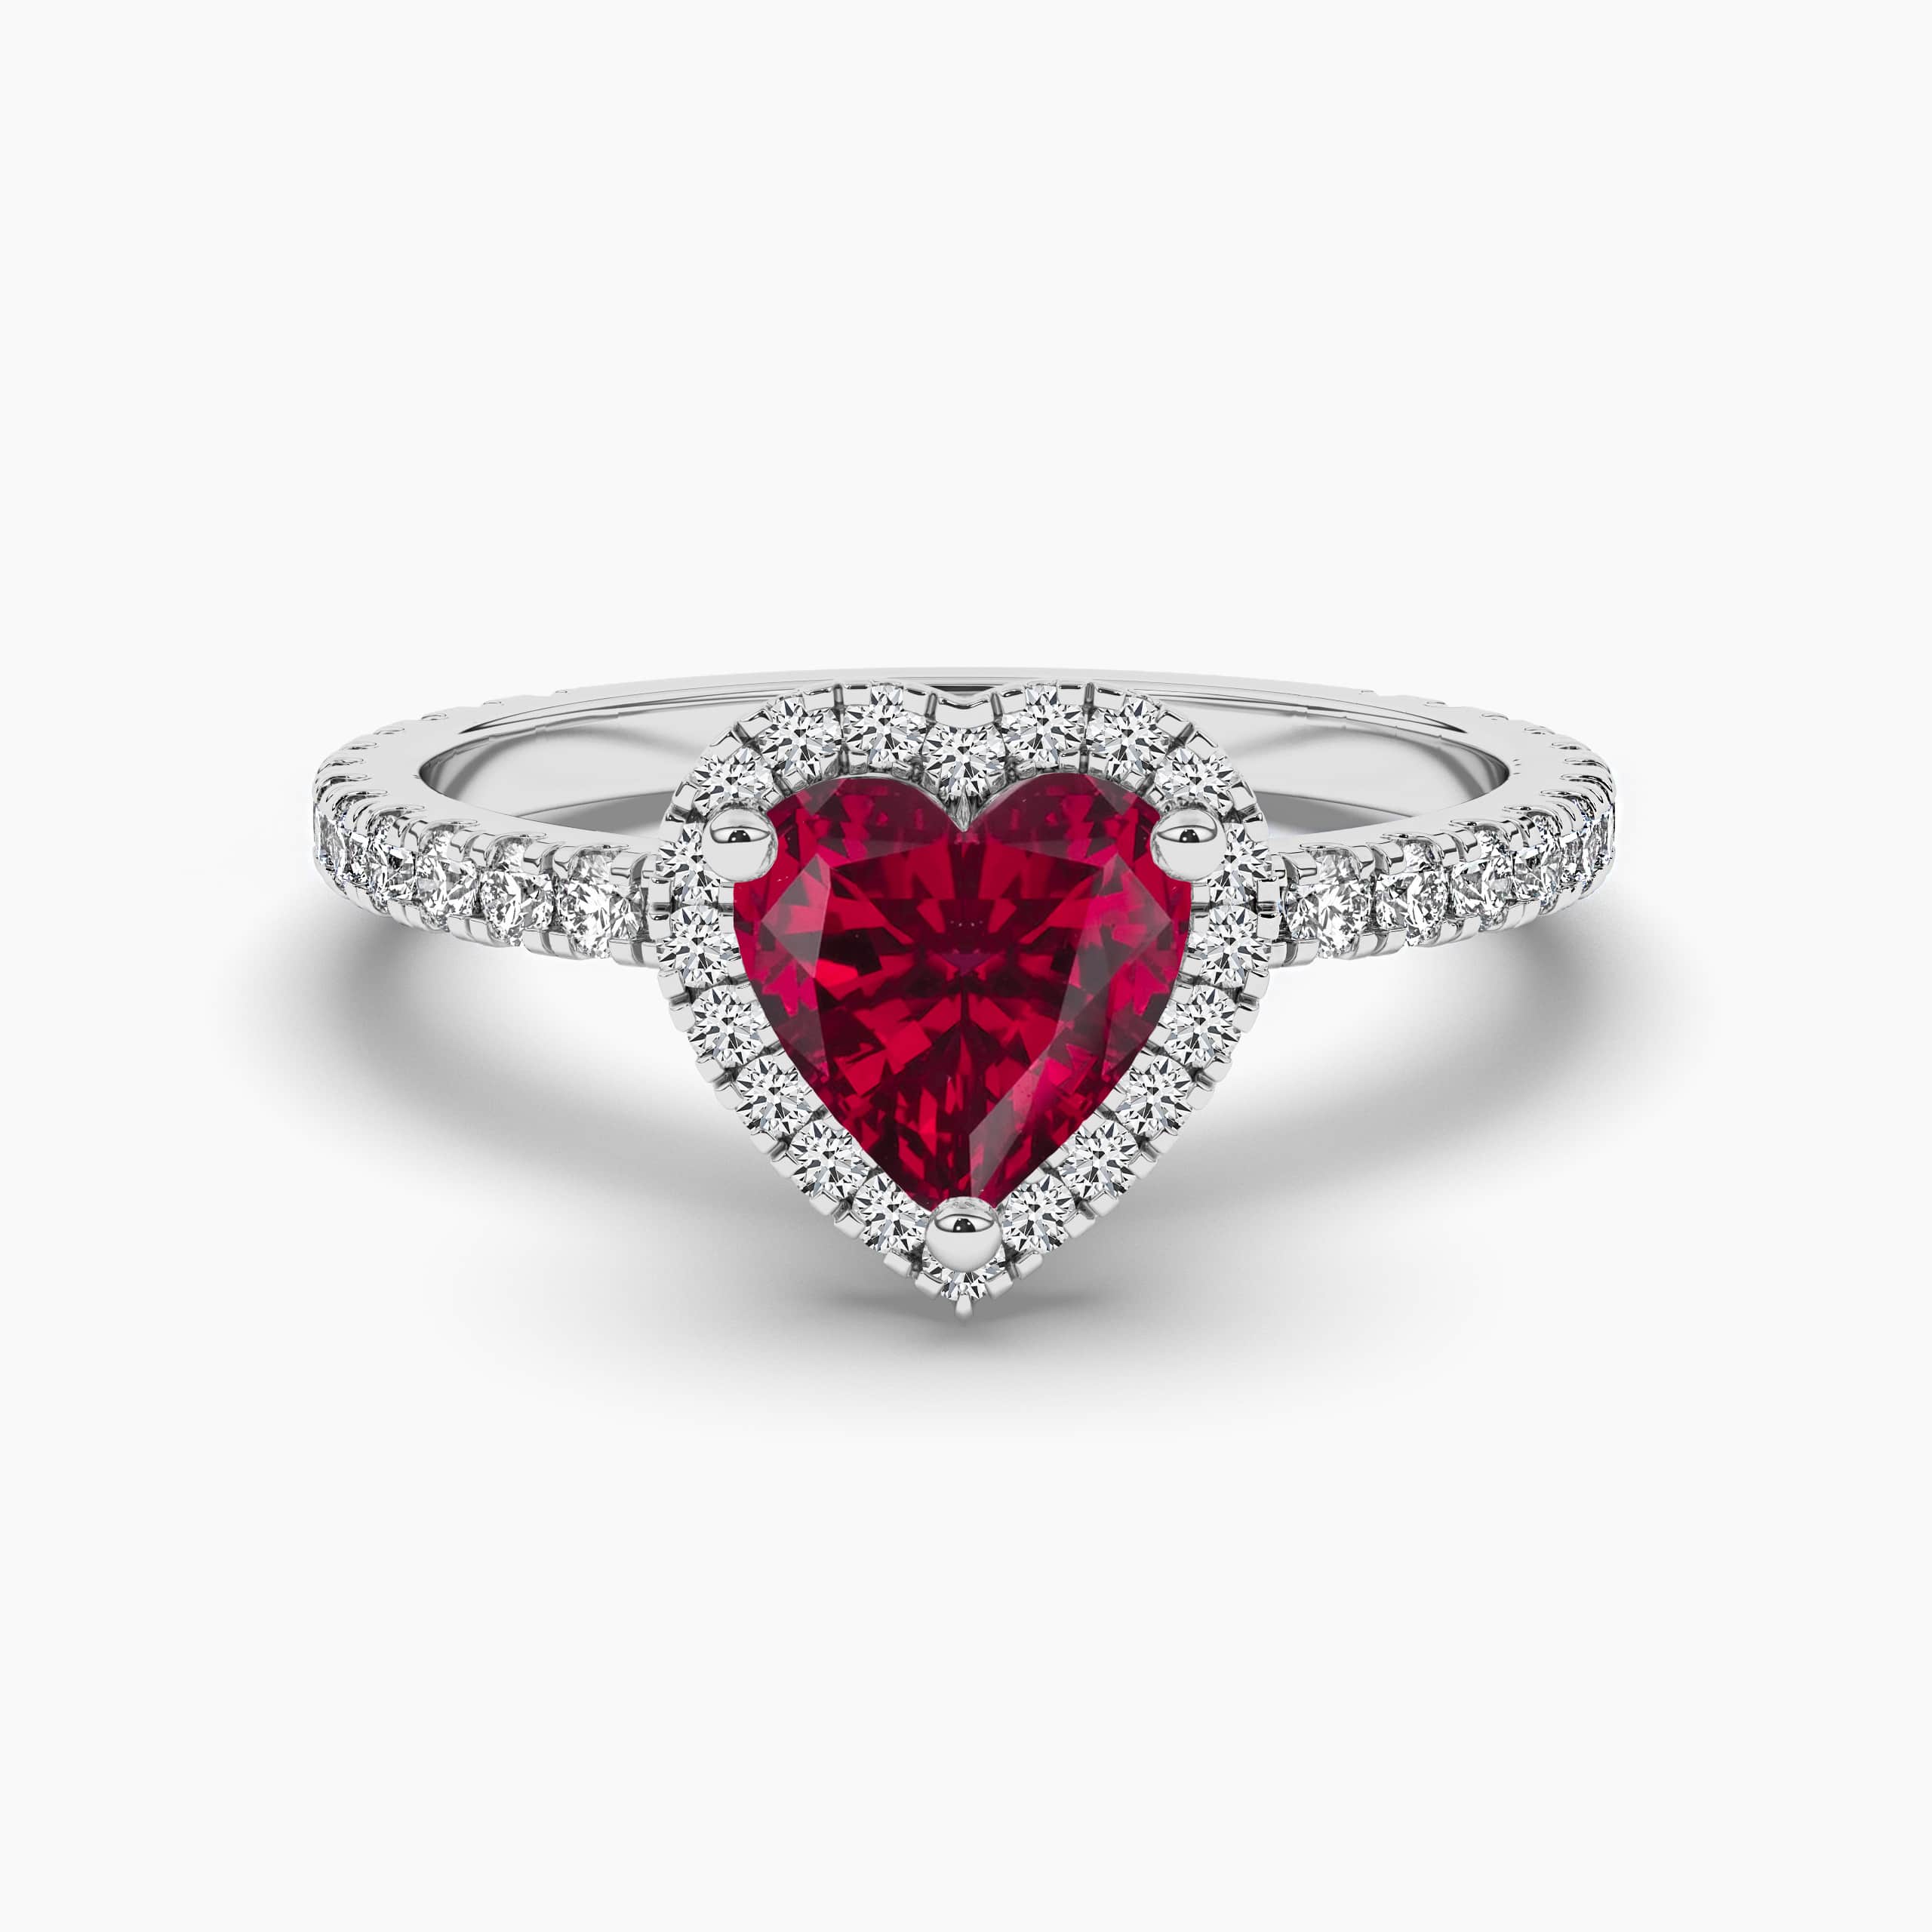 Heart shaped Ruby engagement ring white gold ring 